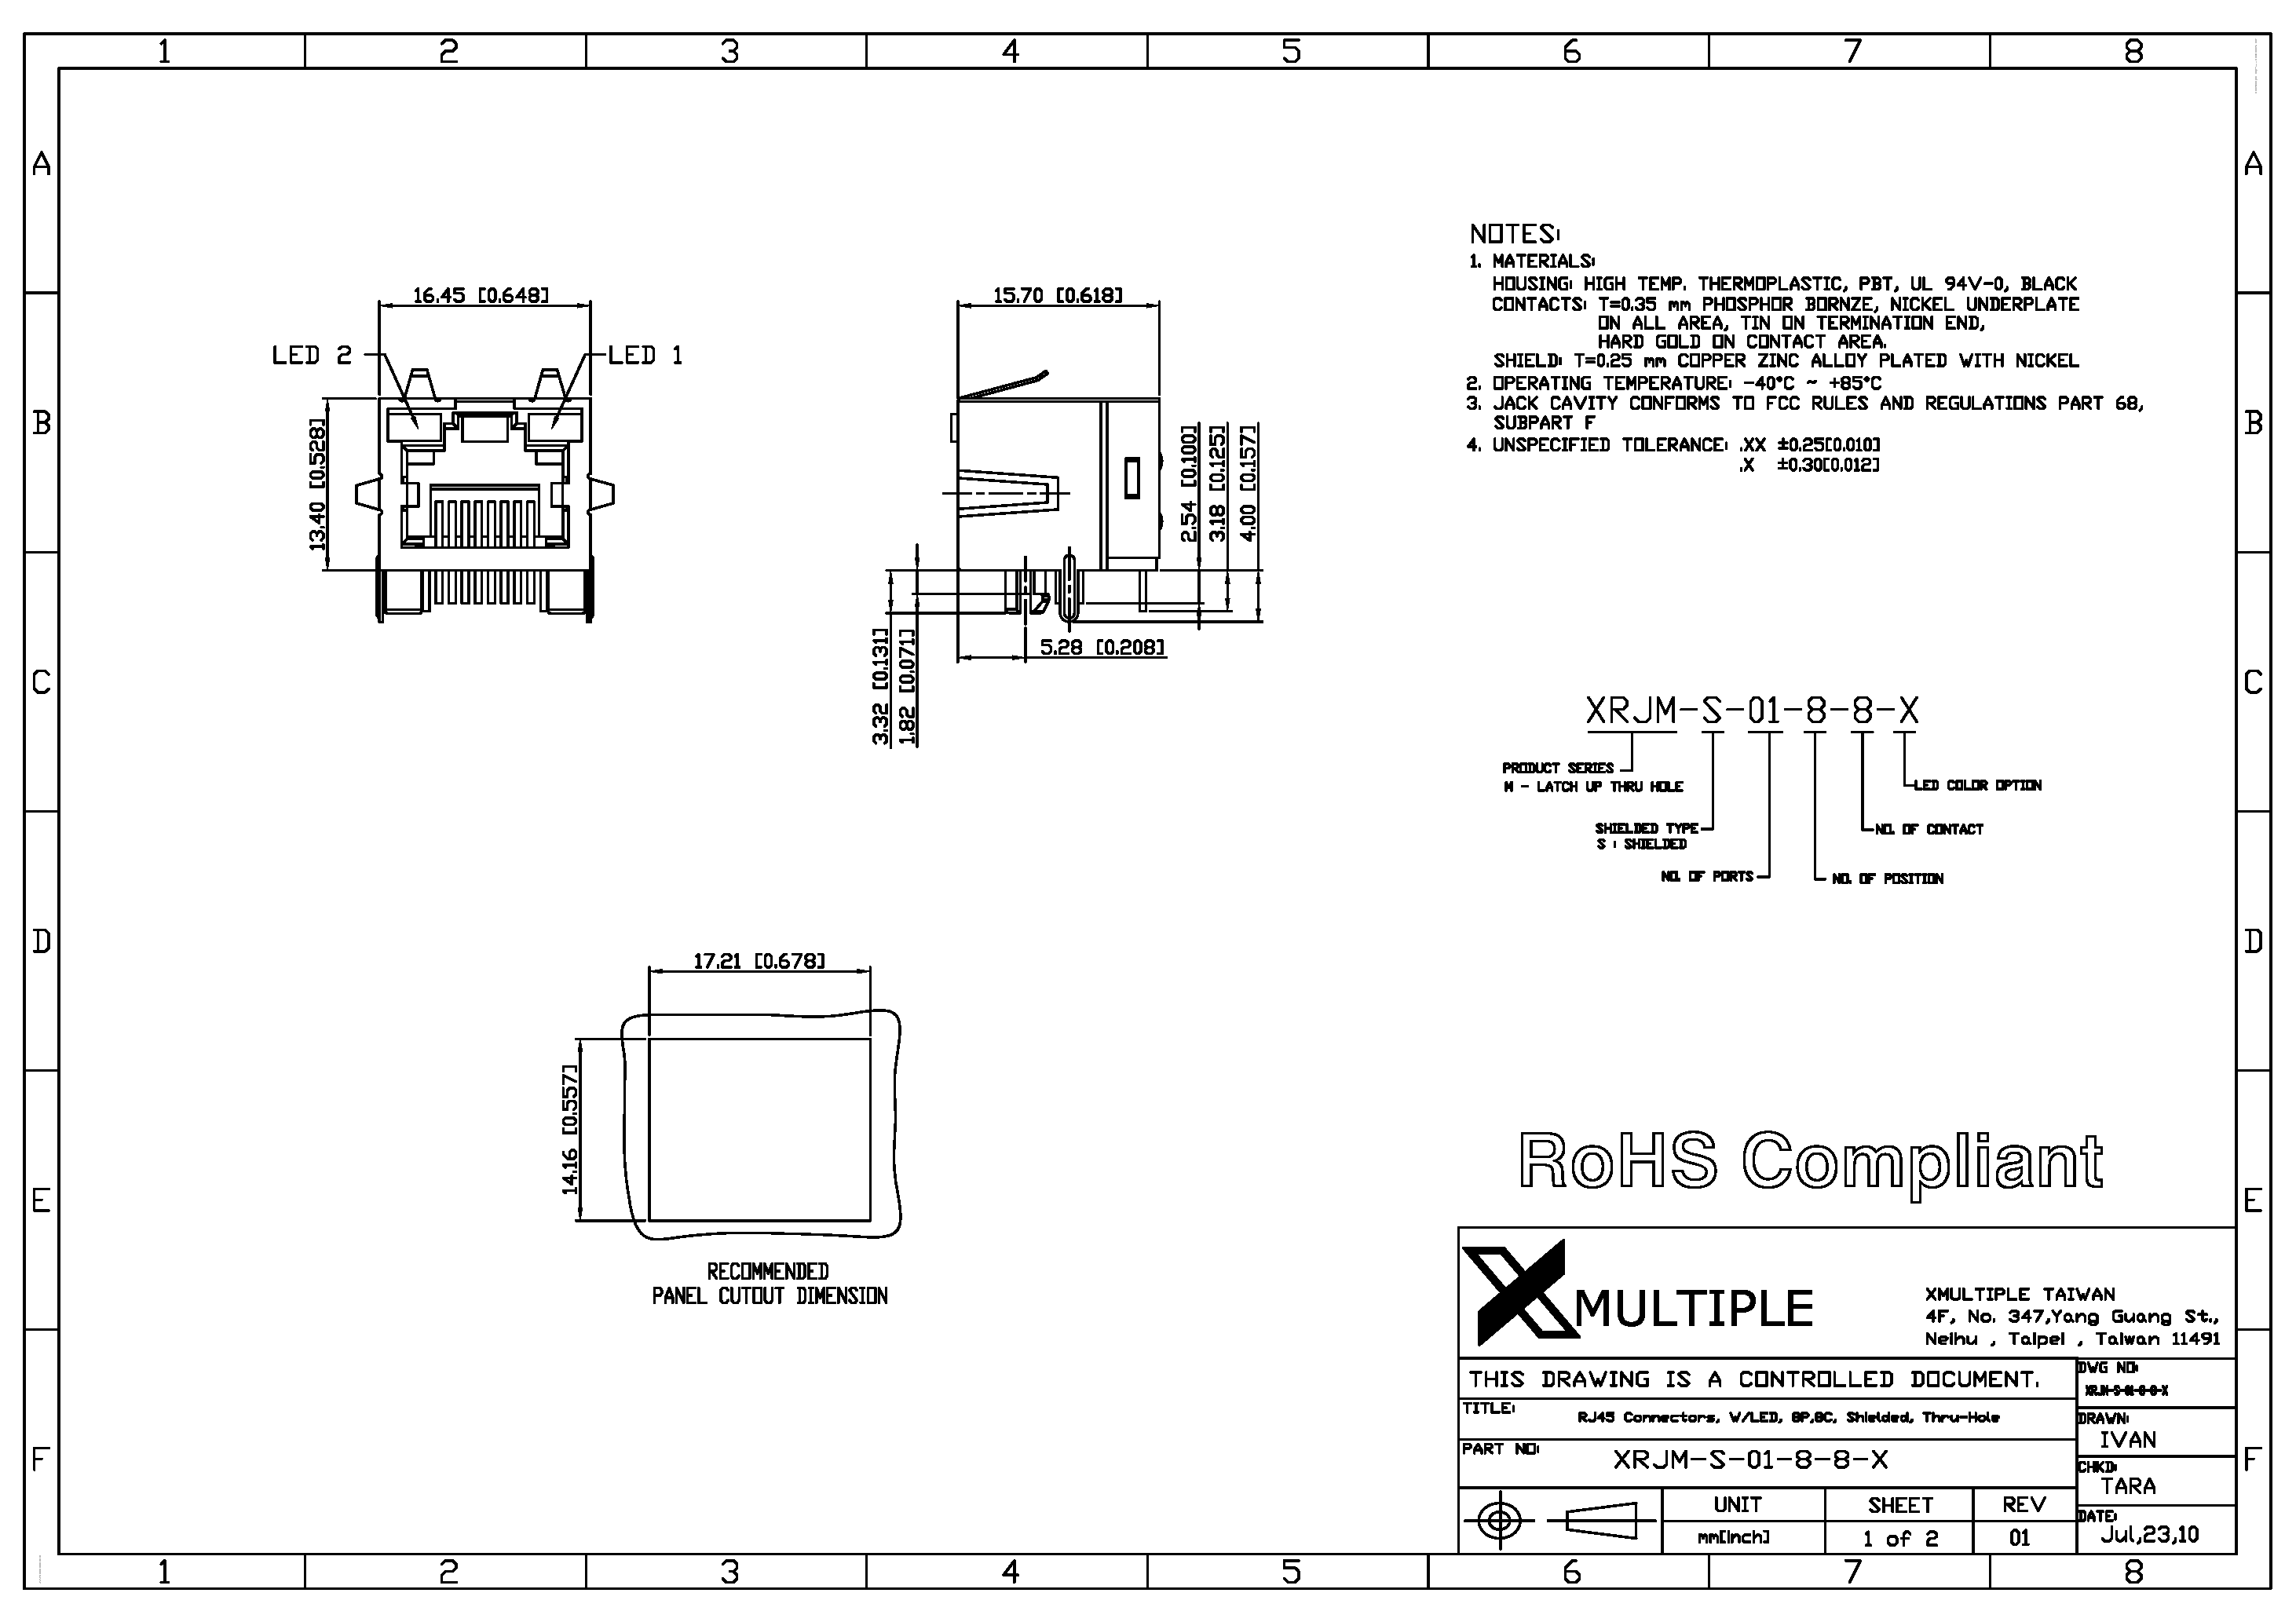 Datasheet XRJM-S-01-8-8-x - Connector page 1